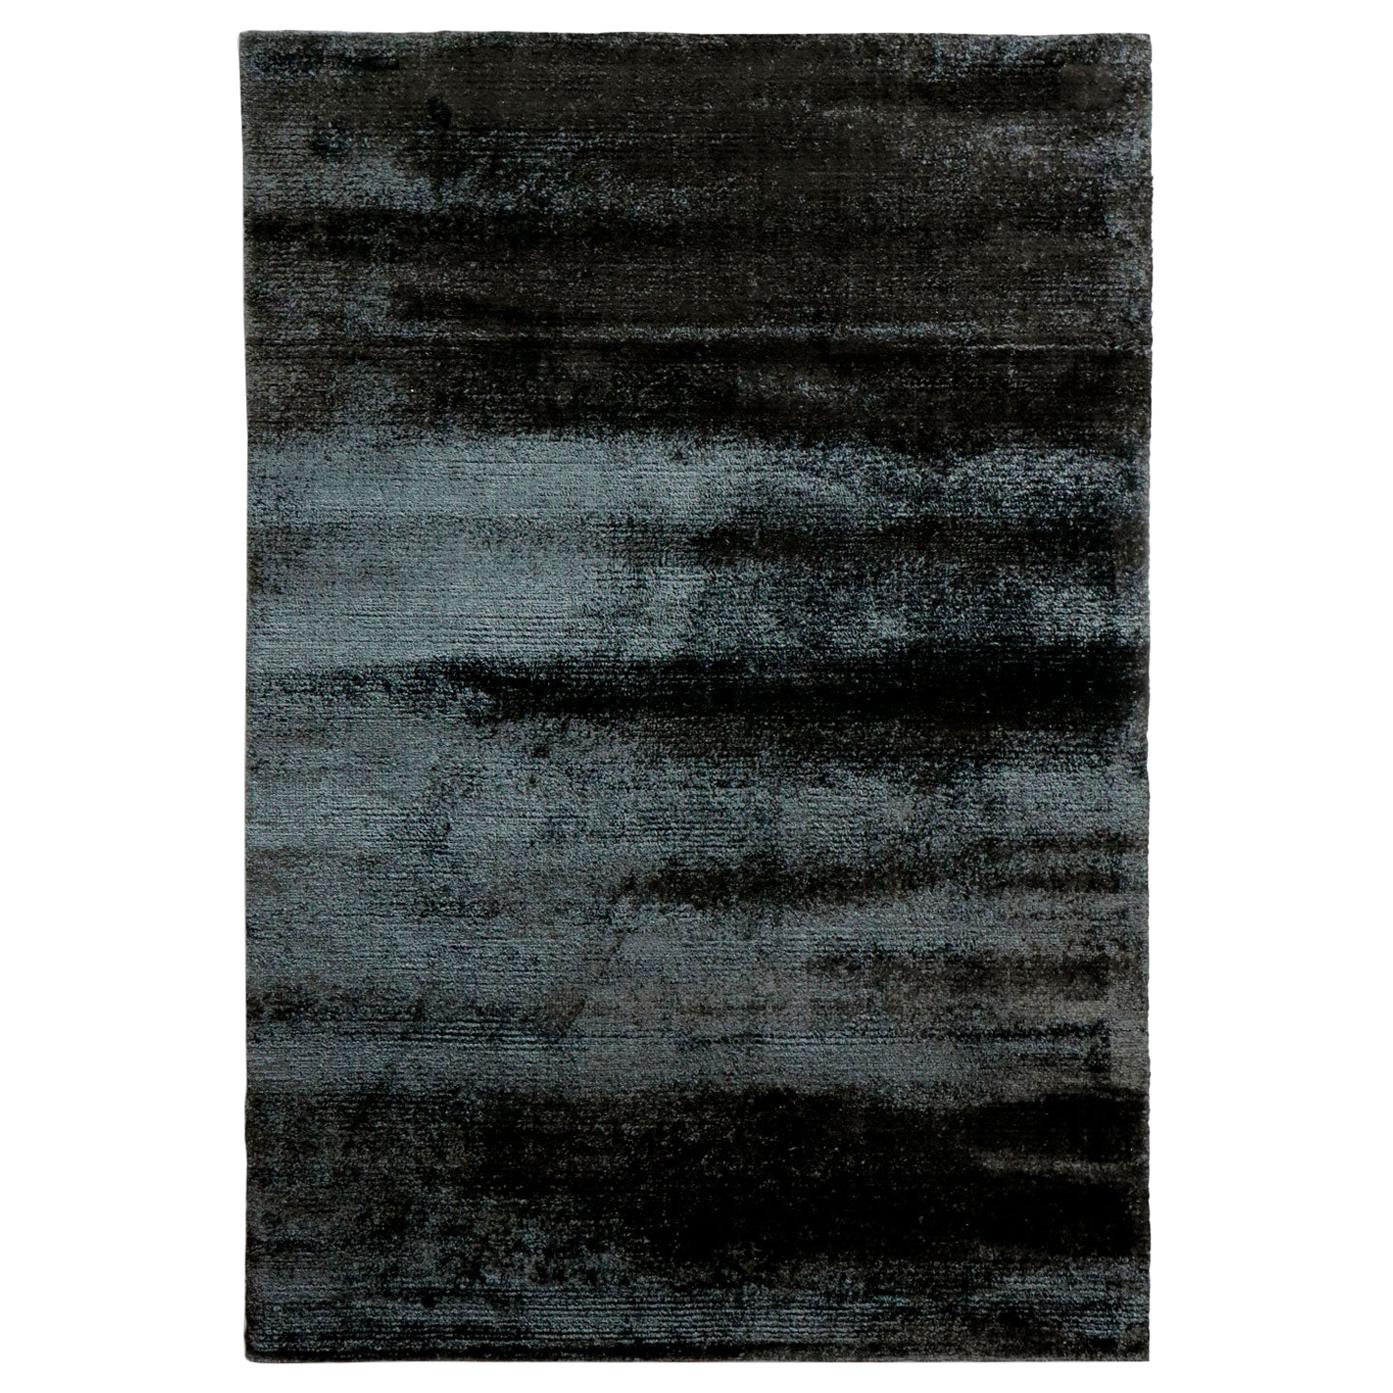 21st Cent Iconic Signature Black Rug by Deanna Comellini In Stock 200x300 cm For Sale